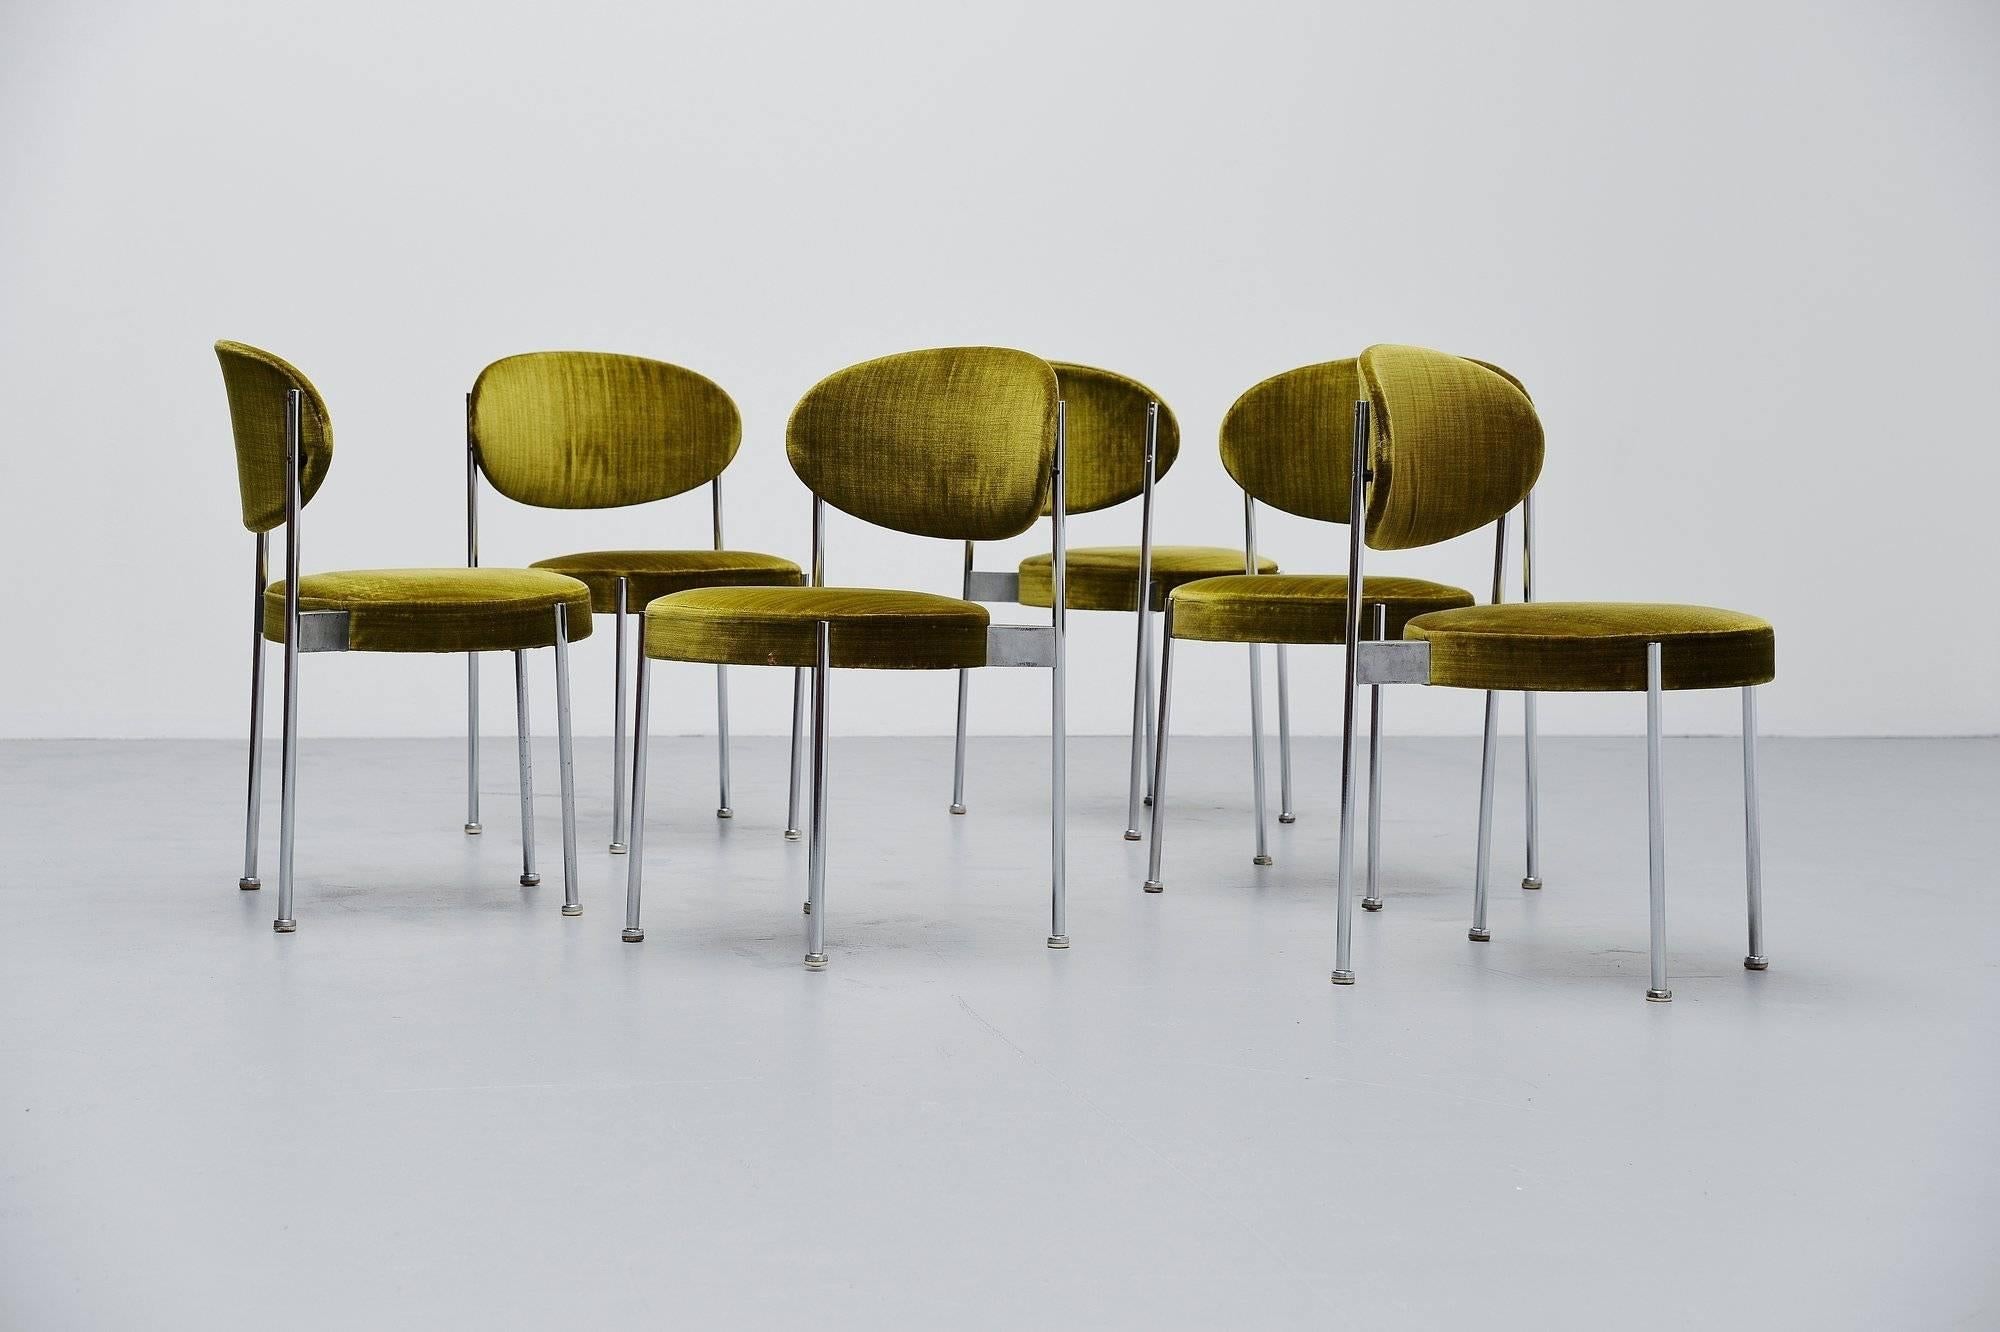 Rare set of six dining chairs designed by Verner Panton, manufactured by Thonet, Germany, 1967. These chairs have there original green velvet upholstery which is still in good acceptable condition. The chairs have chrome plated tubular metal legs